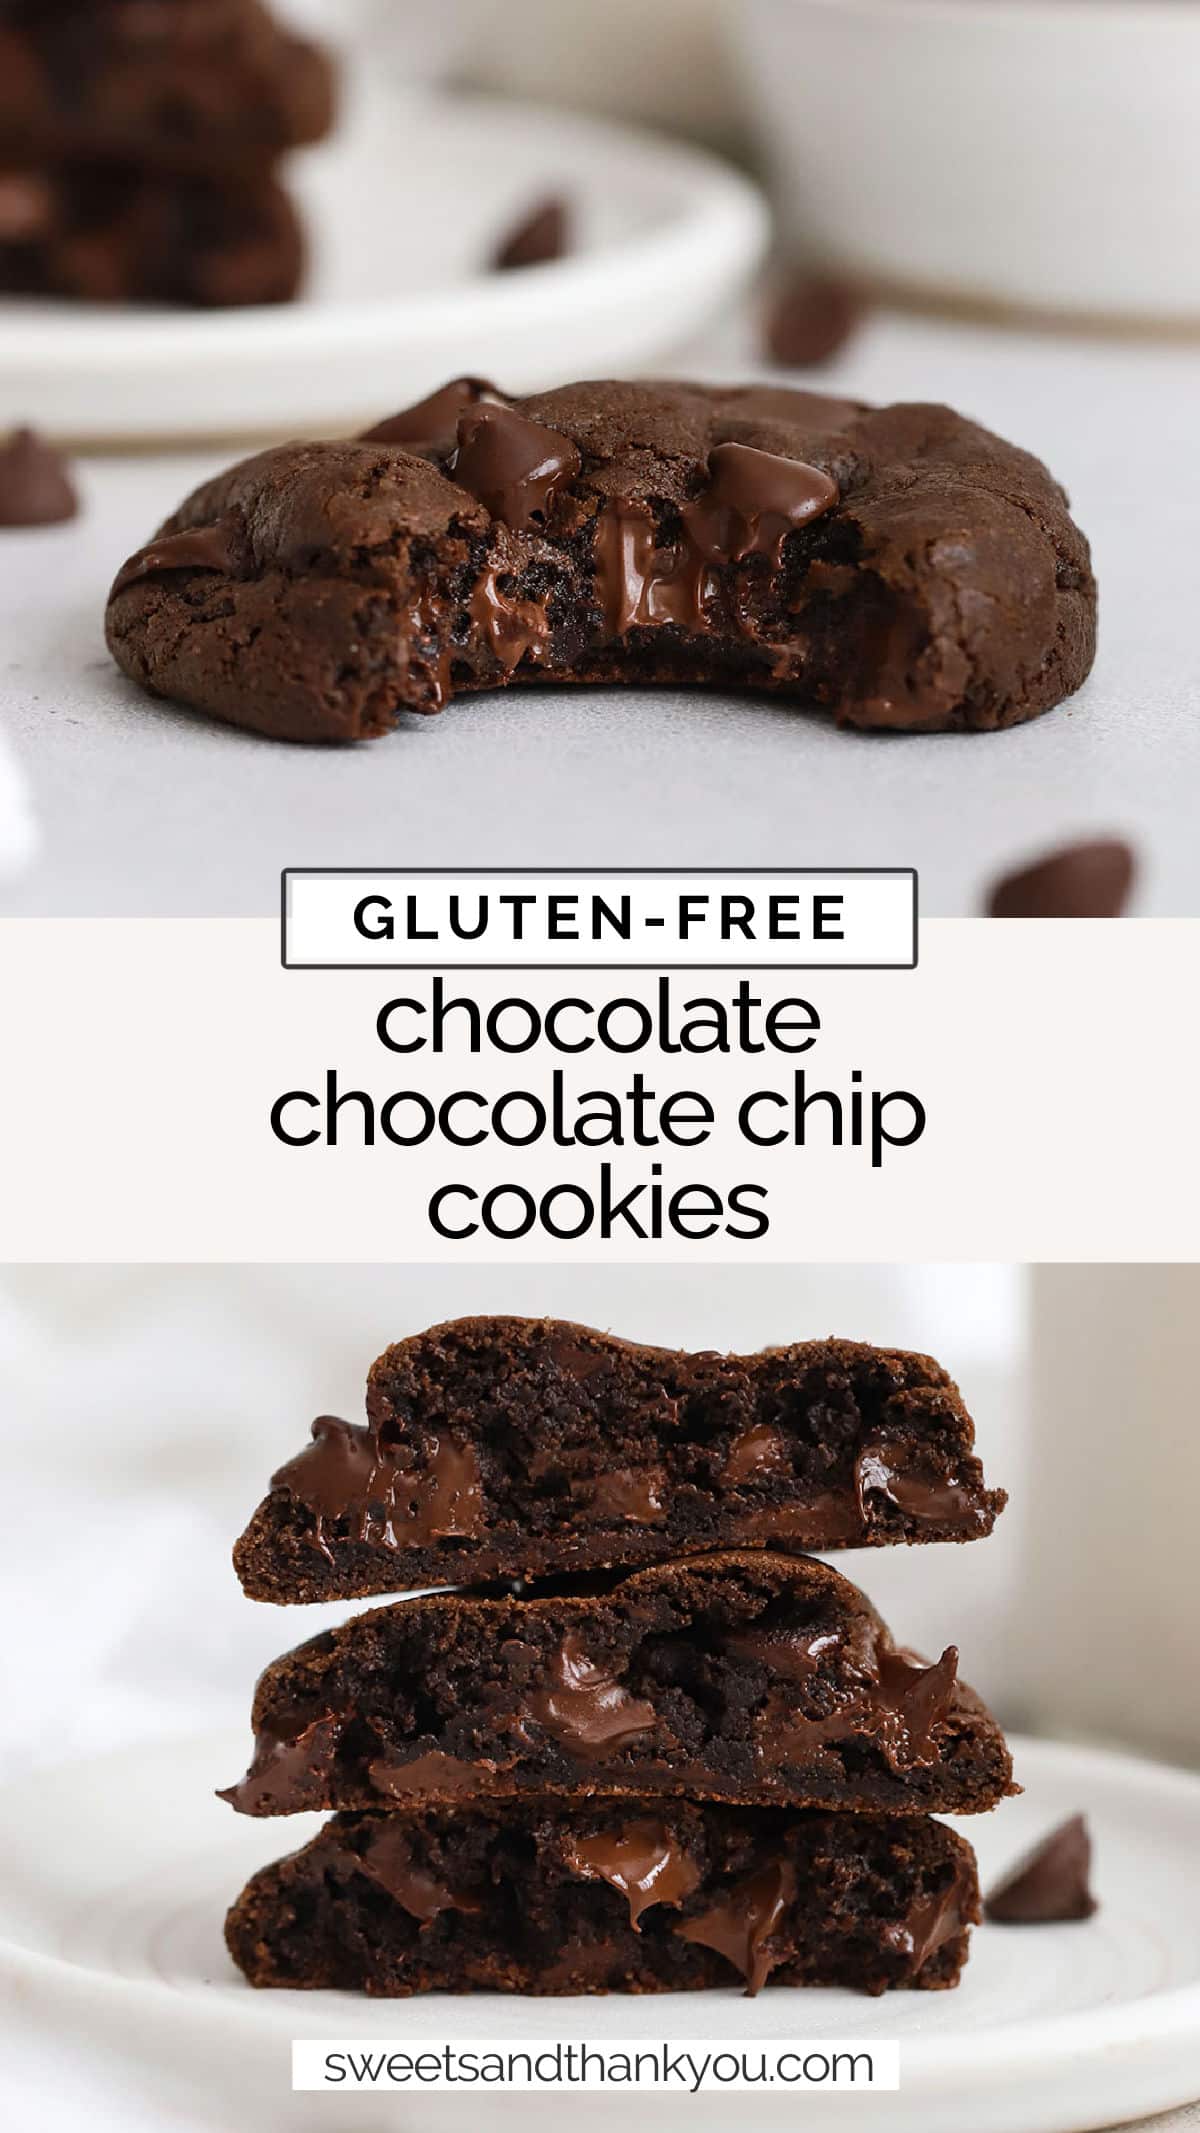 Gluten-Free Chocolate Chocolate Chip Cookies. Made with a chocolate cookie base, and plenty of chocolate chips, these gluten-free double-chocolate chip cookies are made for chocolate lovers! // gluten free double chocolate cookies / gluten free chocolate chocolate cookies recipe / gluten free cookie recipe / gluten free chocolate cookie recipe / gluten free cookies / gluten free chocolate chip cookies / gluten free cookie recipes